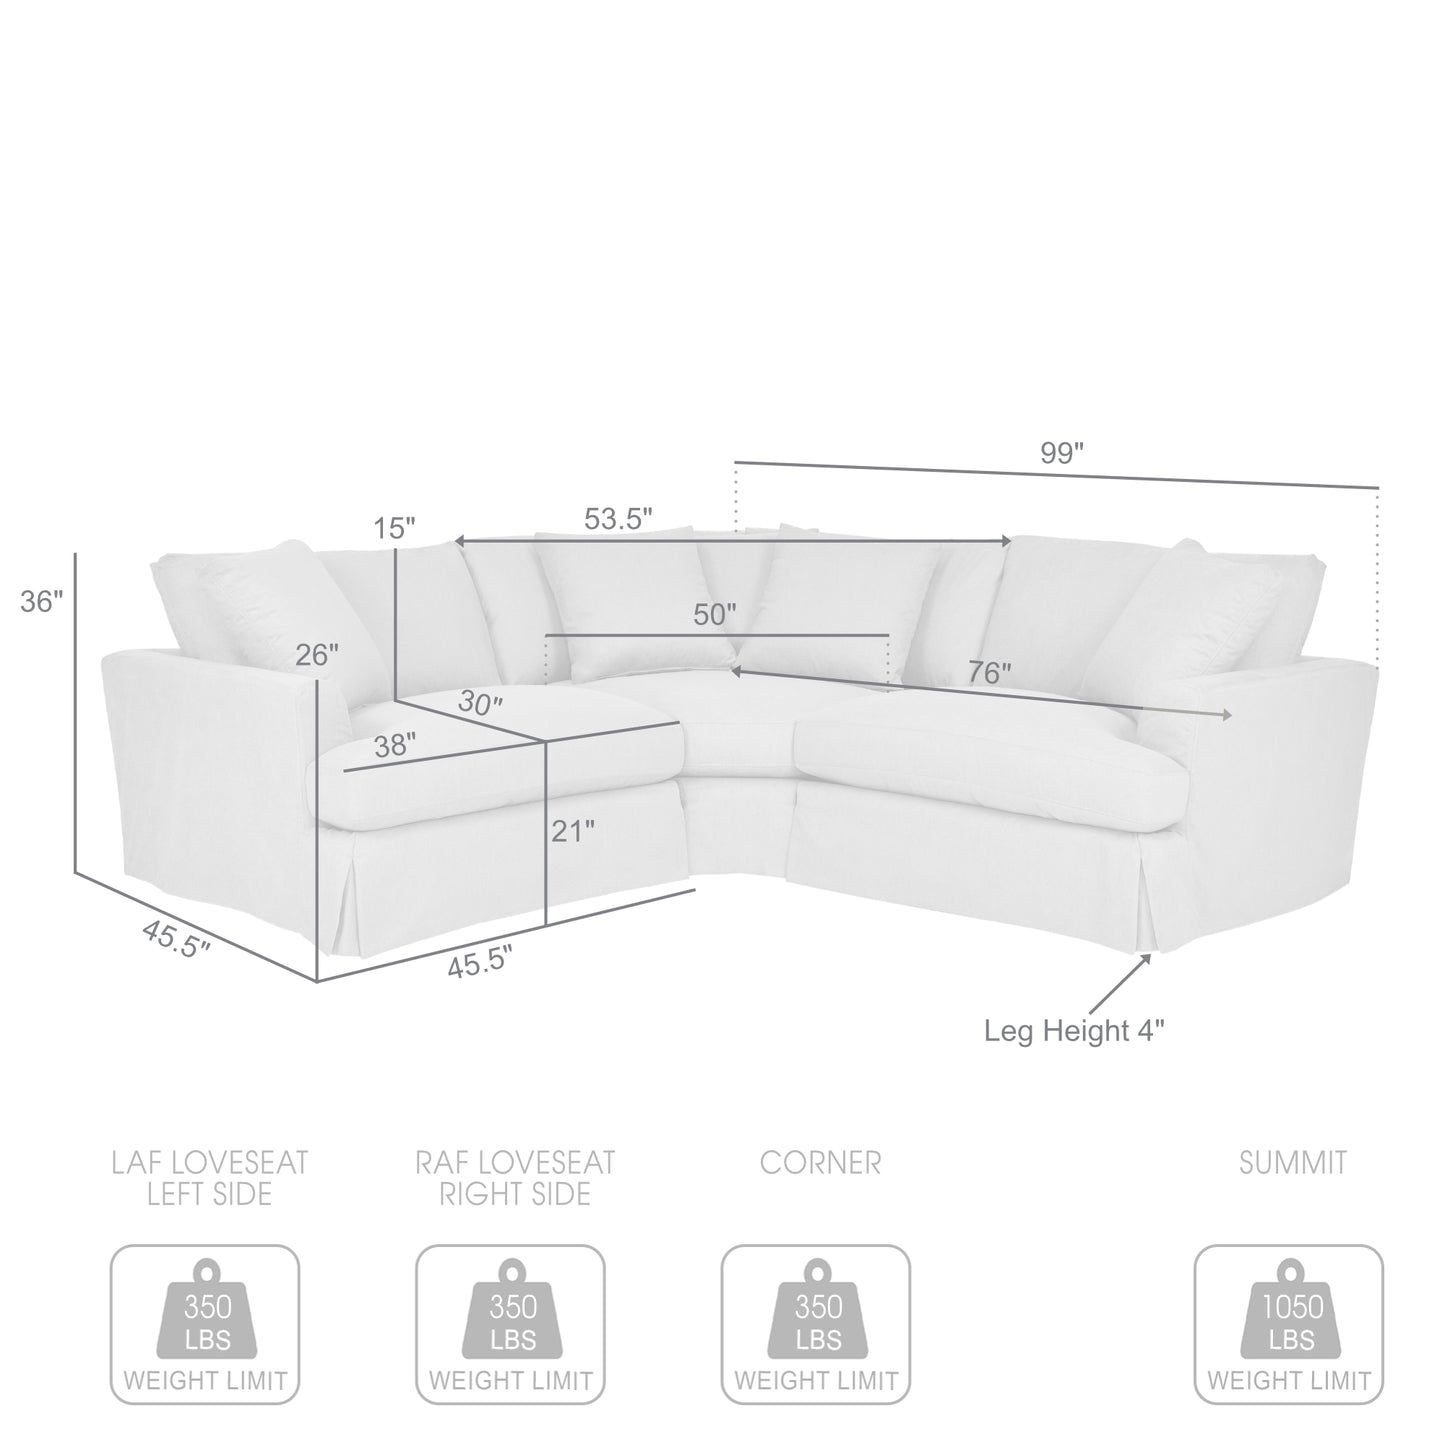 Ciara Upholstered 3 Piece Sectional Sofa in Pearl